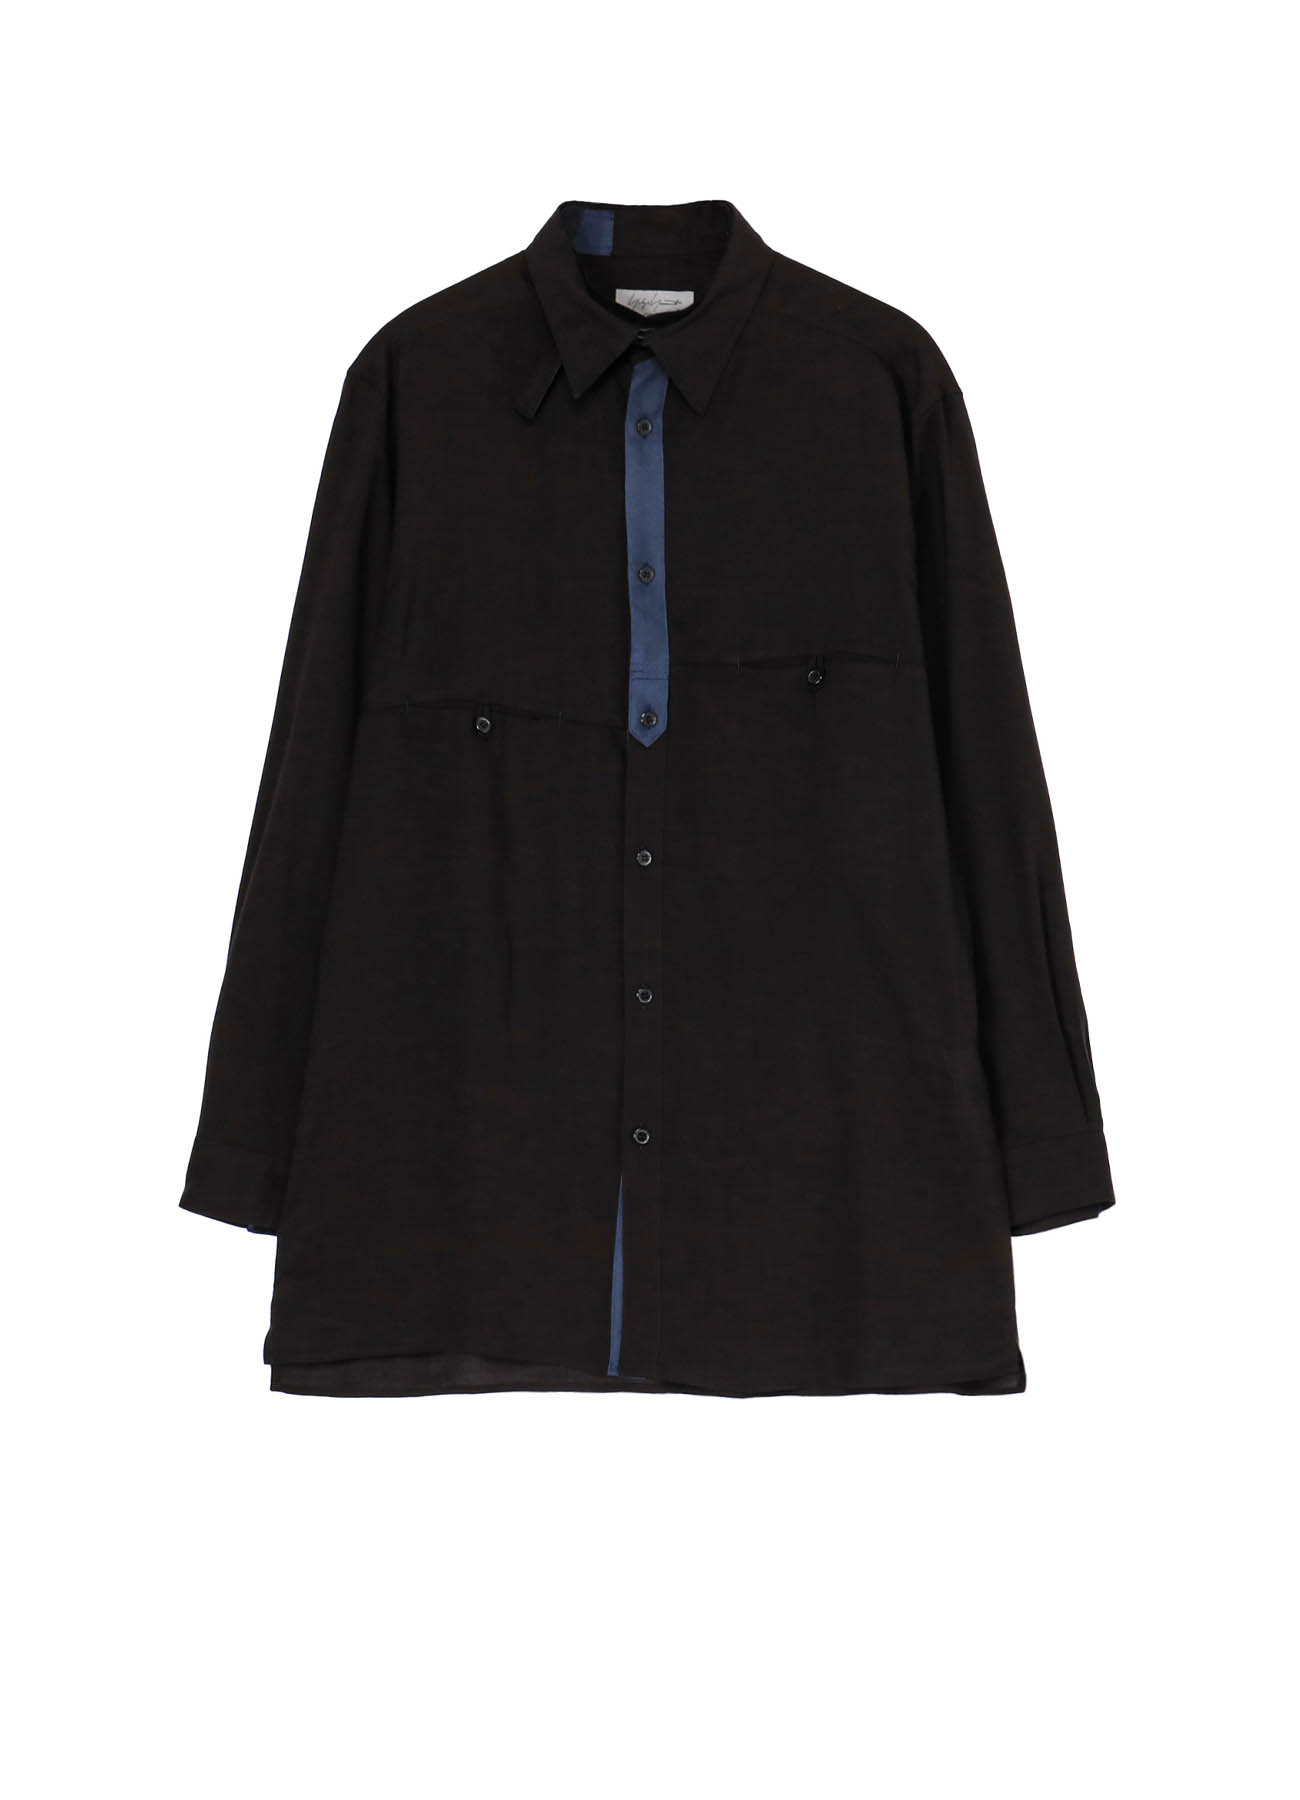 CELLLOSE LOAN CHEST PANEL BLOUSE WITH NAVY CLOTH